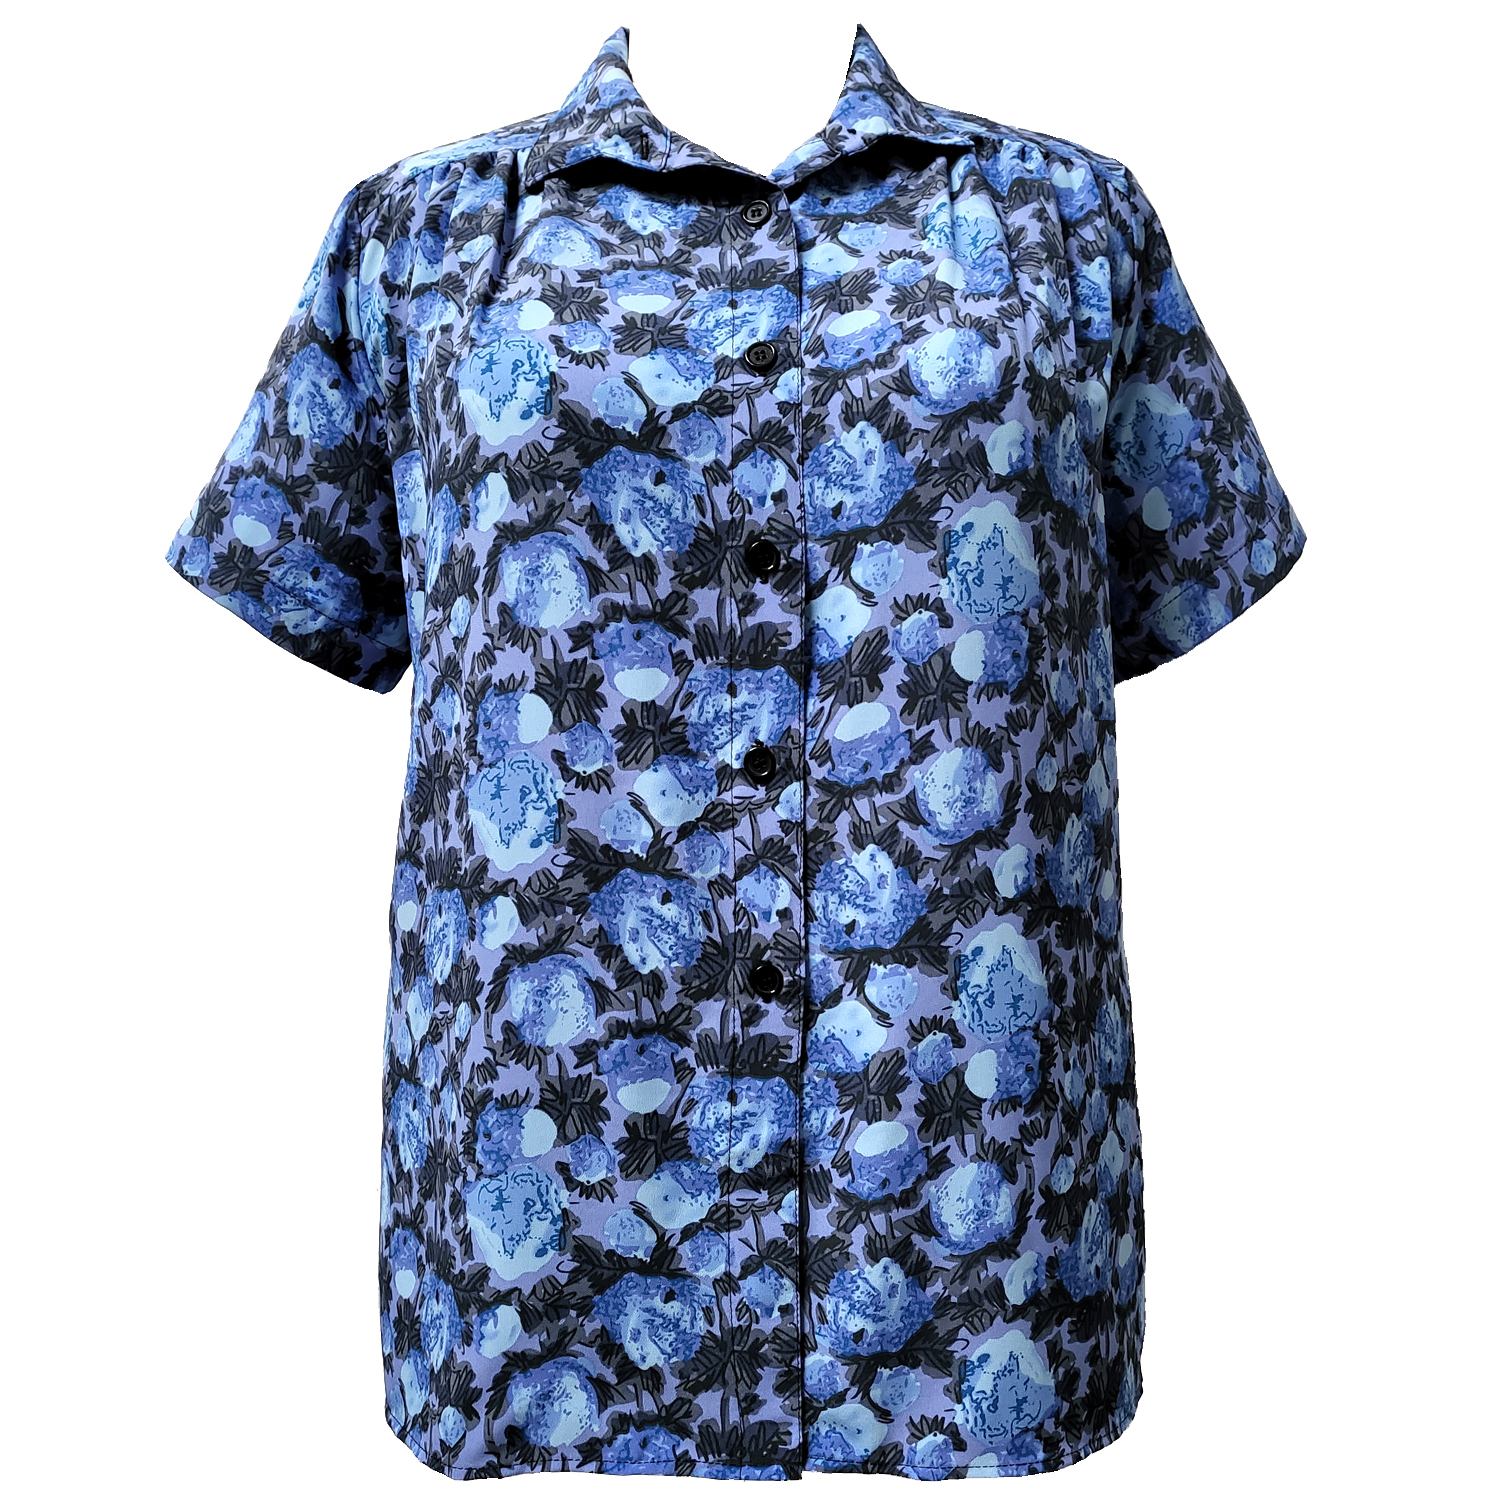 A Personal Touch Women's Plus Size Short Sleeve Button Front Tunic with Shirring - Blue Bloom